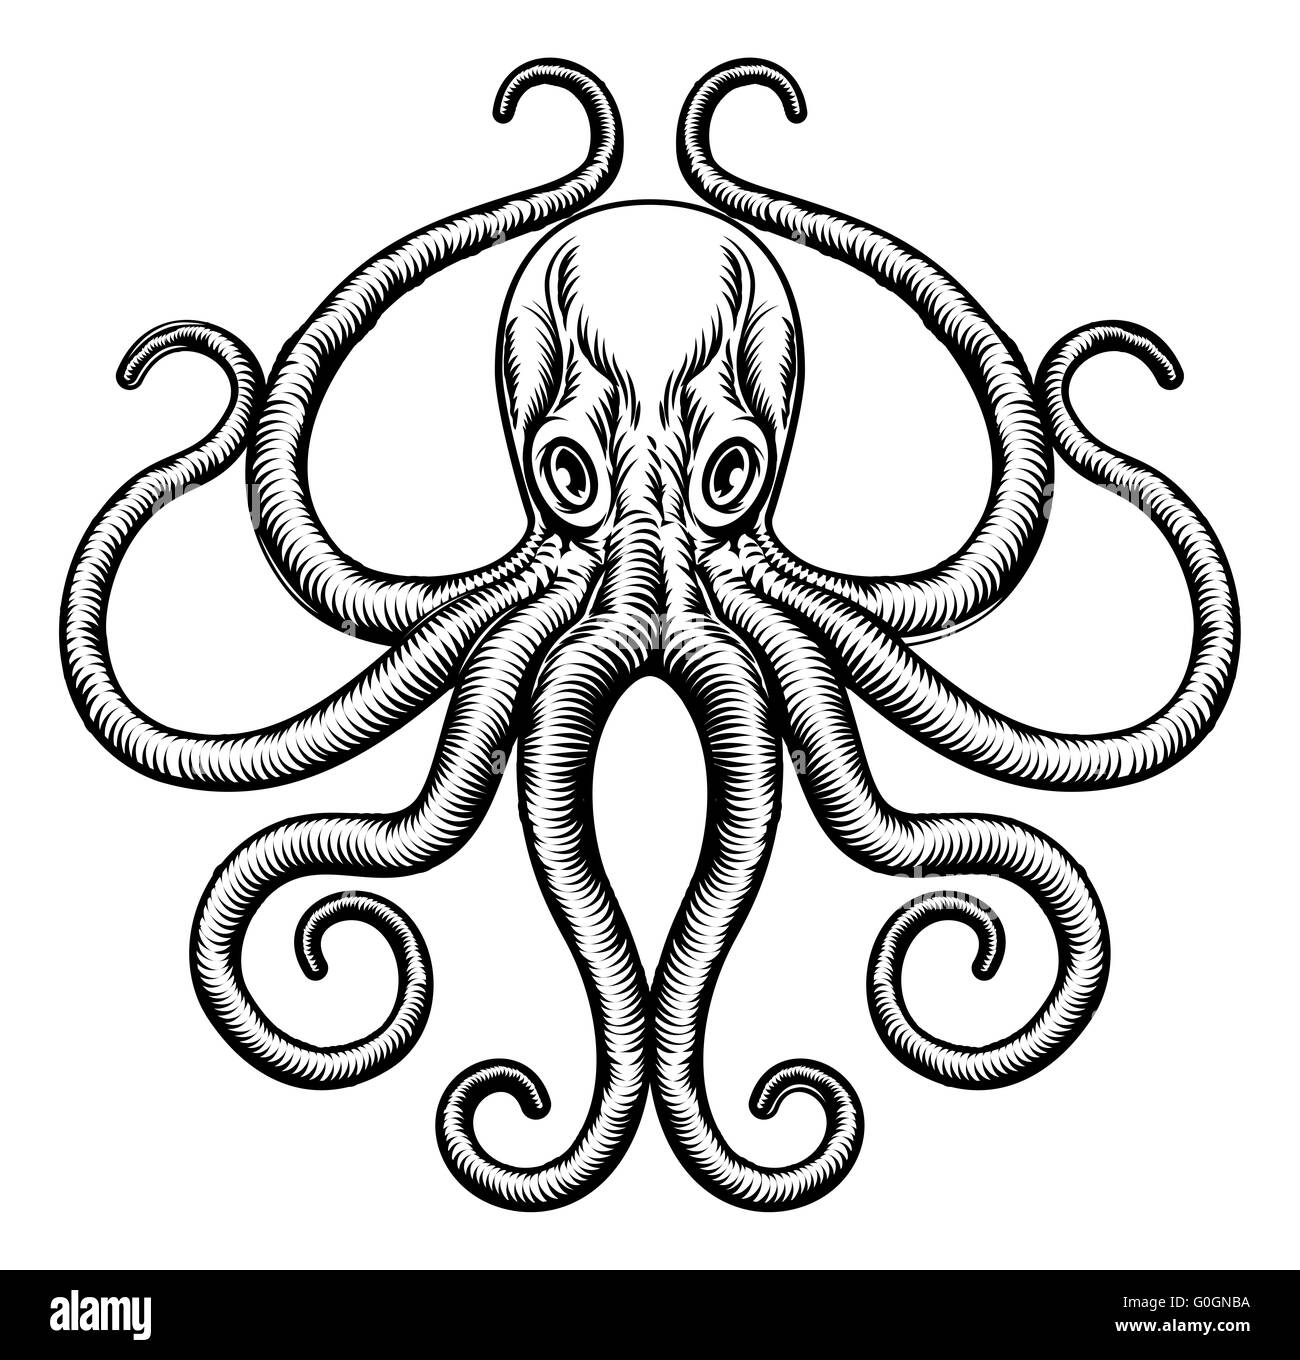 An original octopus or squid tattoo illustration concept design in a vintage woodblock style Stock Photo